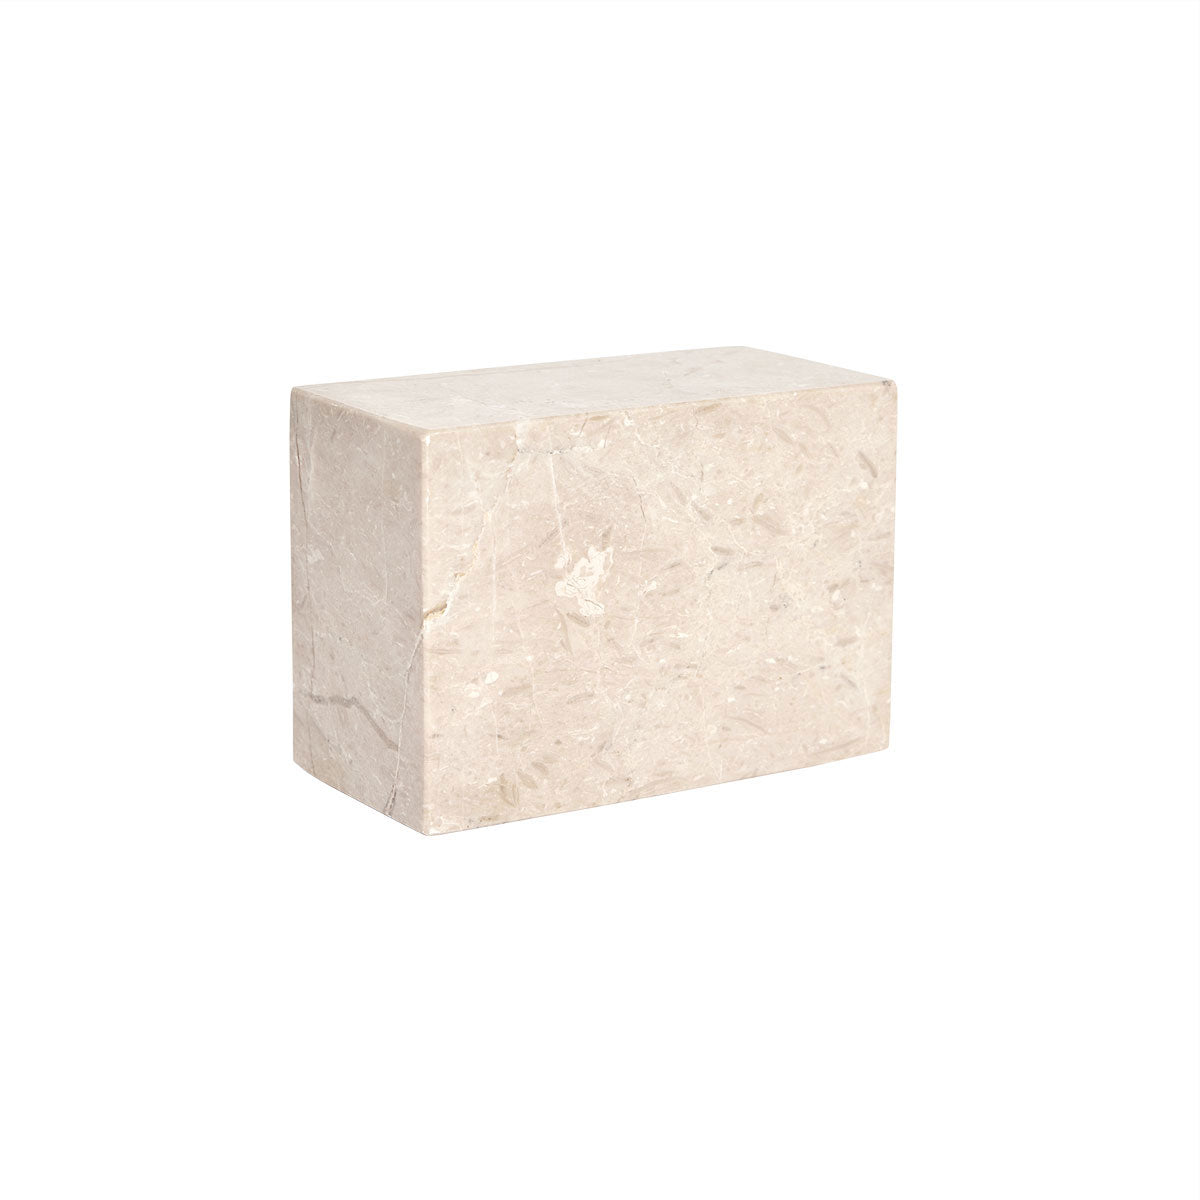 OYOY LIVING Savi Marble Bookend - Square Decoration 103 Beige